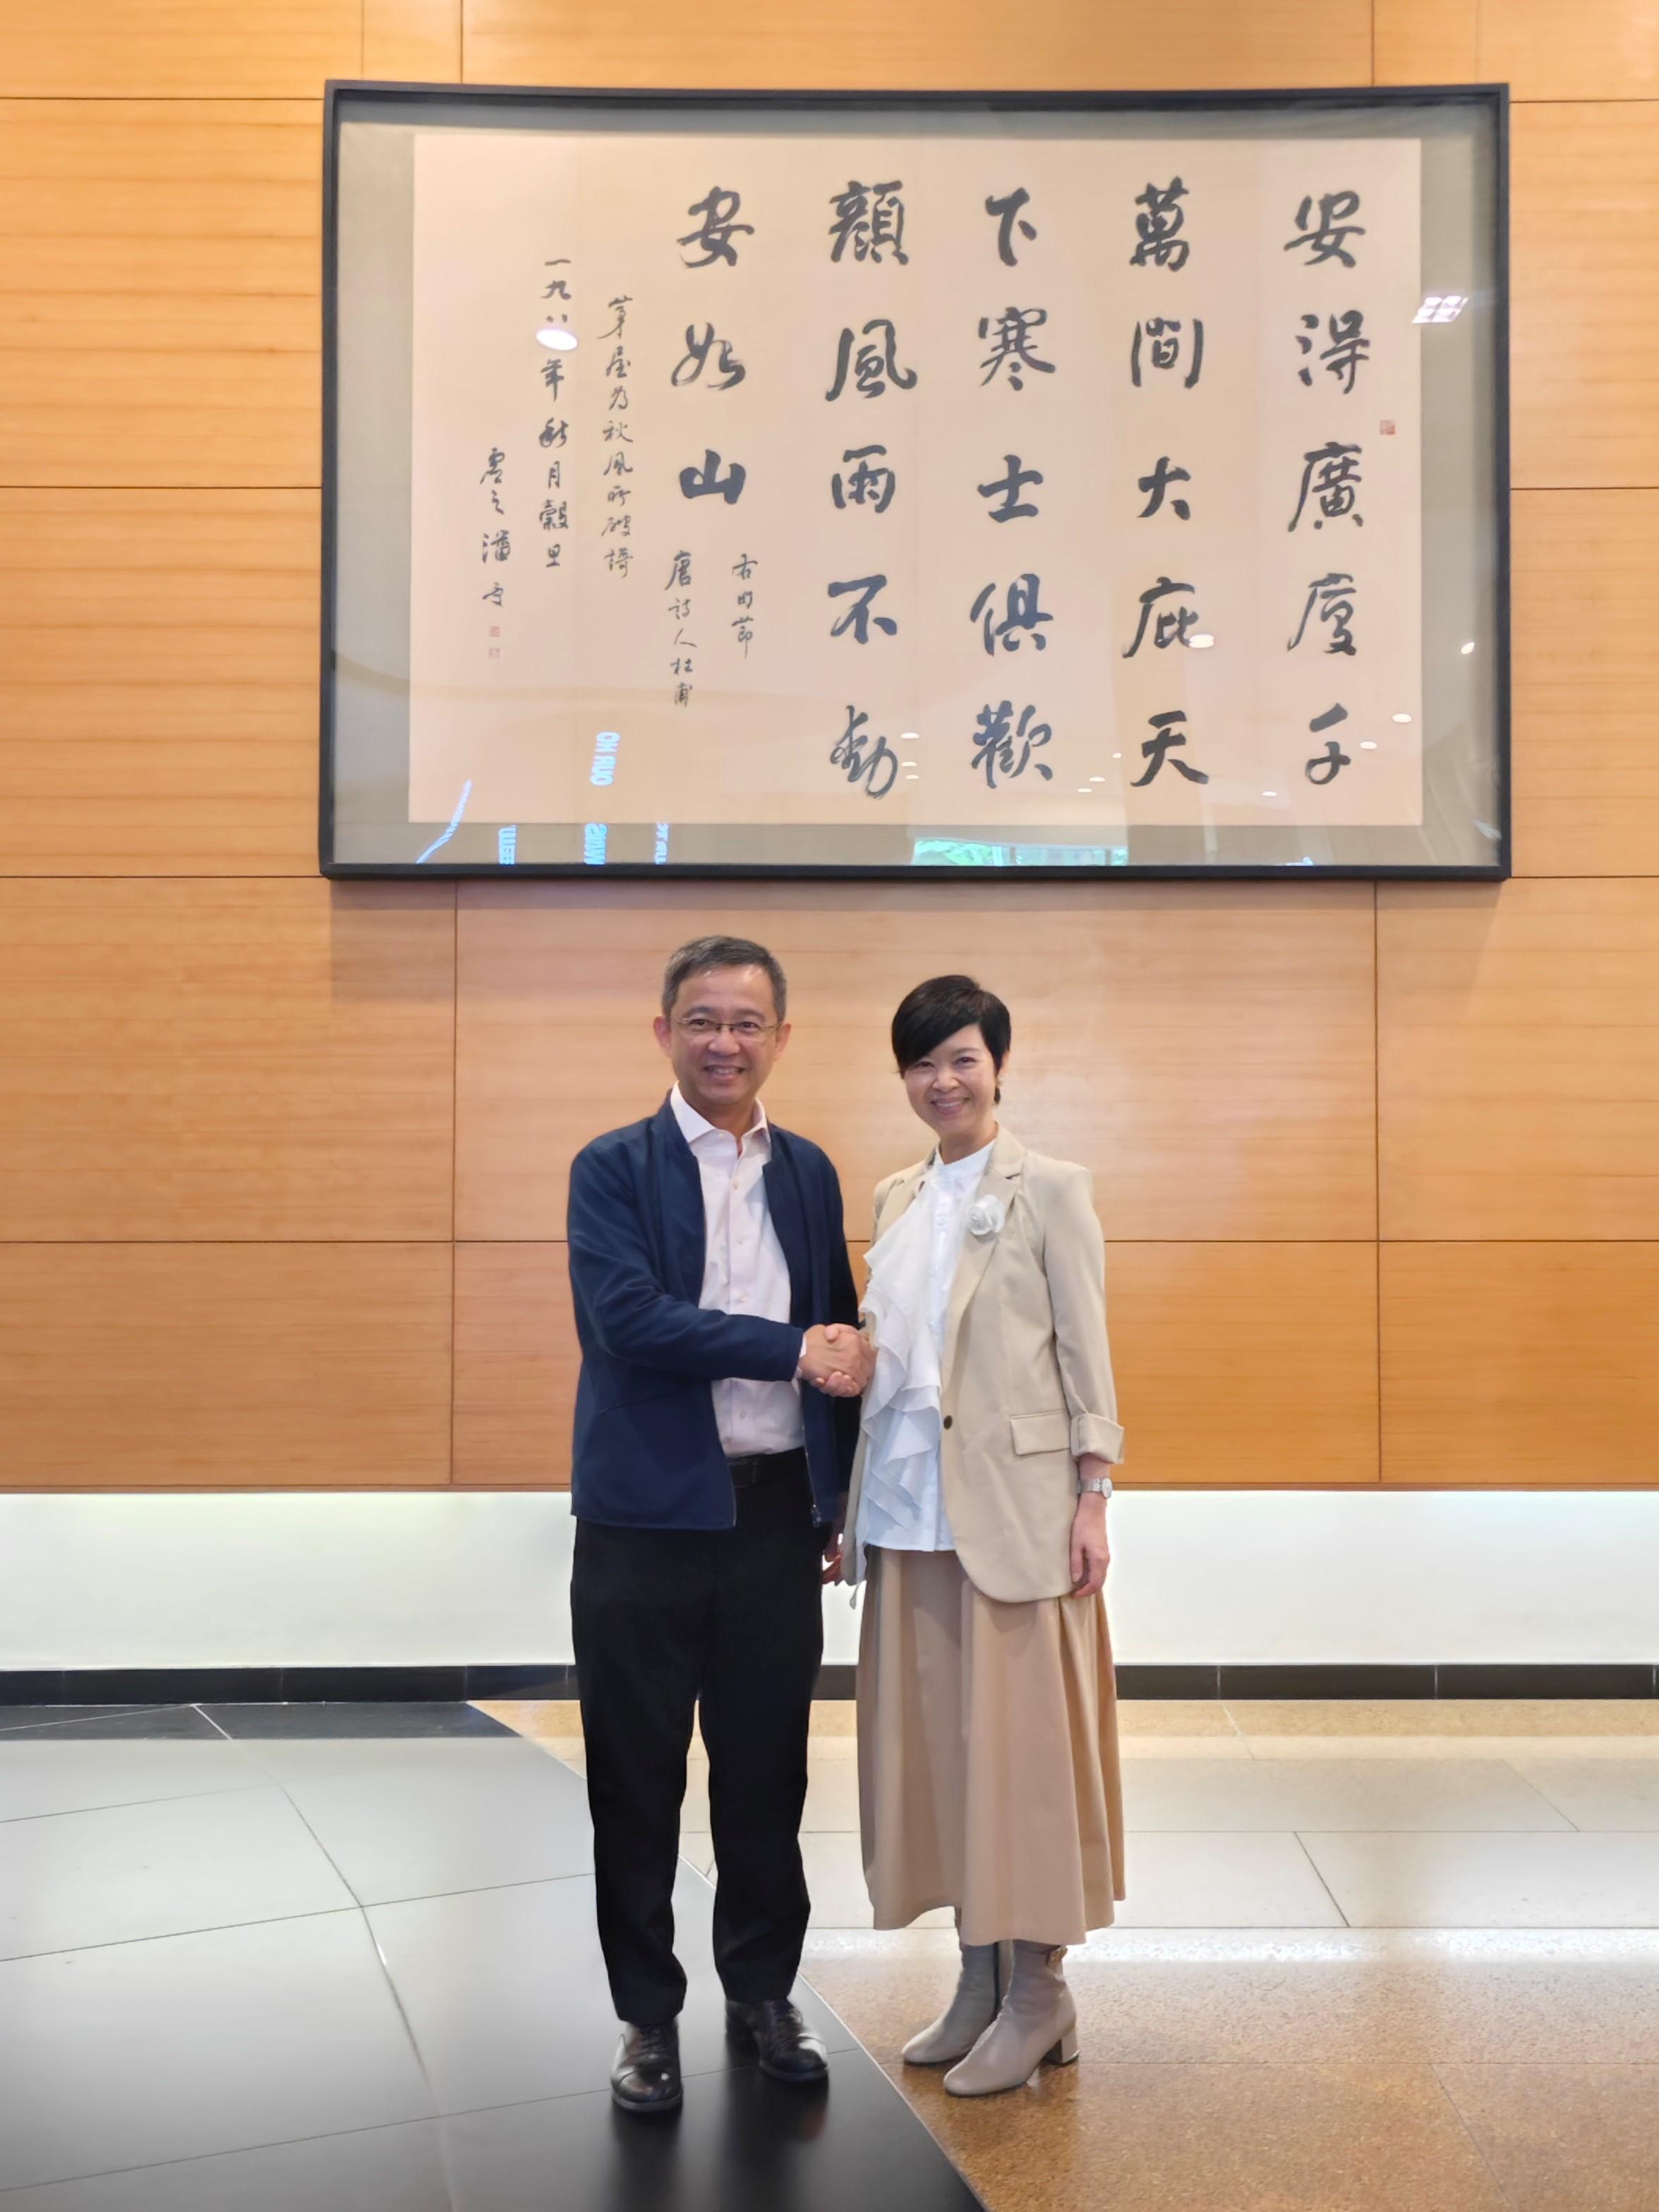 The Secretary for Housing, Ms Winnie Ho, began her visit to Singapore yesterday (August 22). She met with local government officials to exchange views in areas such as housing policies, innovative construction technologies and green building. Photo shows Ms Ho (right) meeting the Chief Executive Officer of the Housing & Development Board of Singapore, Mr Tan Meng Dui (left), yesterday.